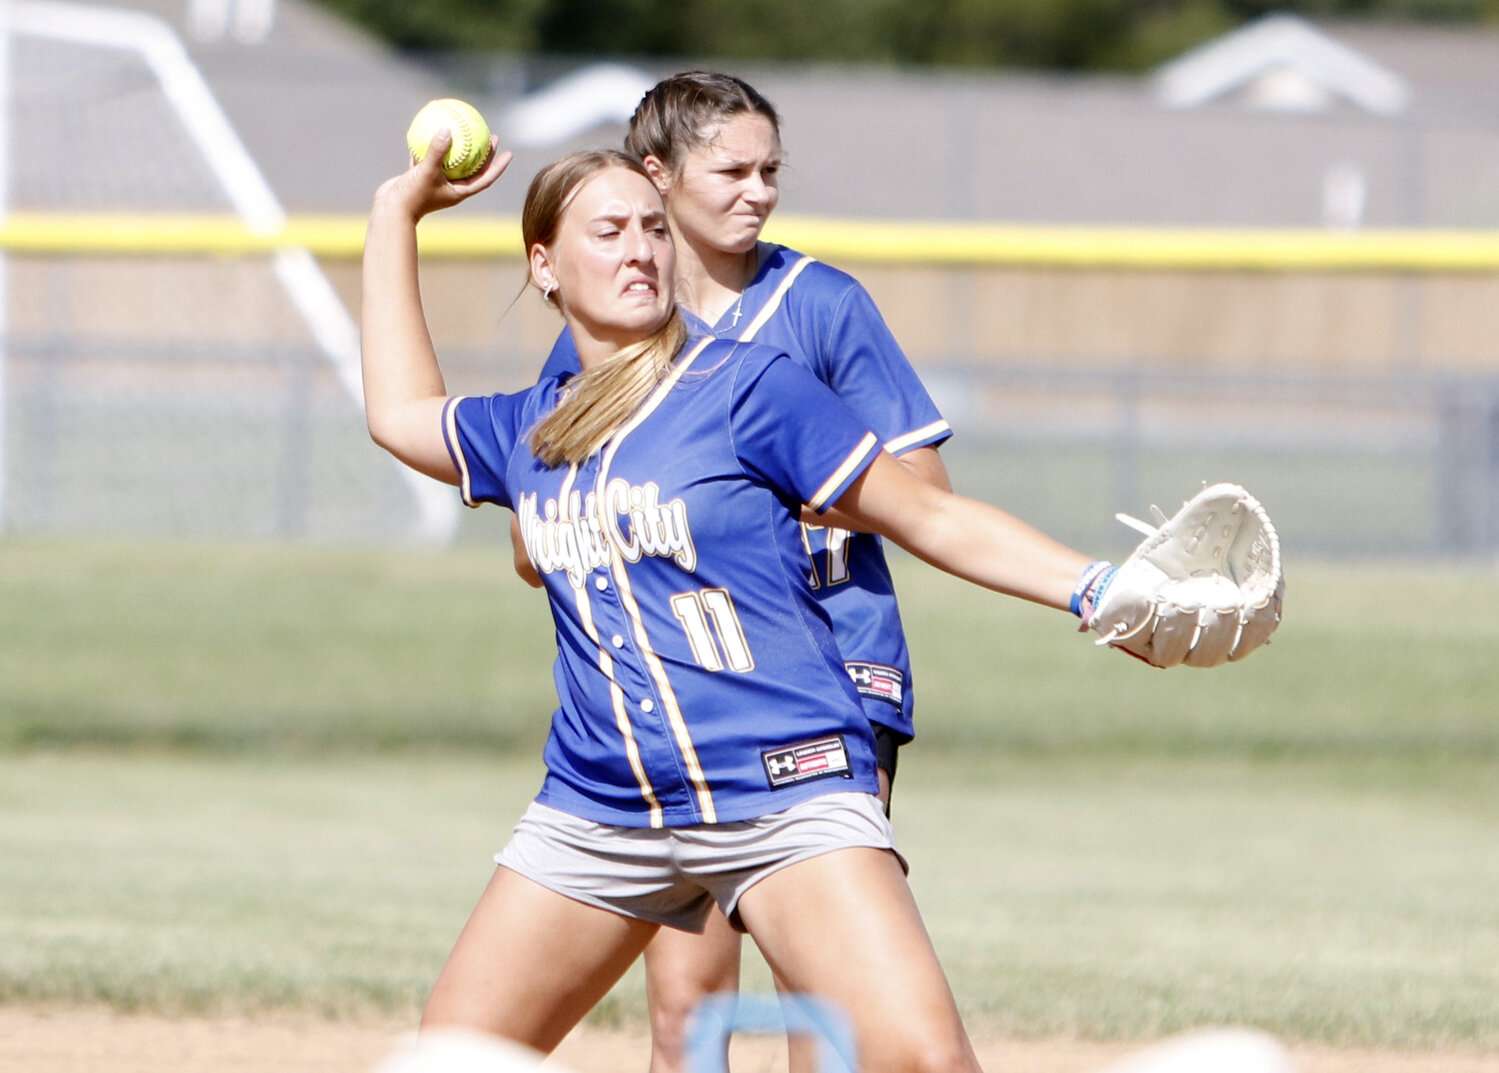 Emma Staats throws the ball during warmups at practice last week.